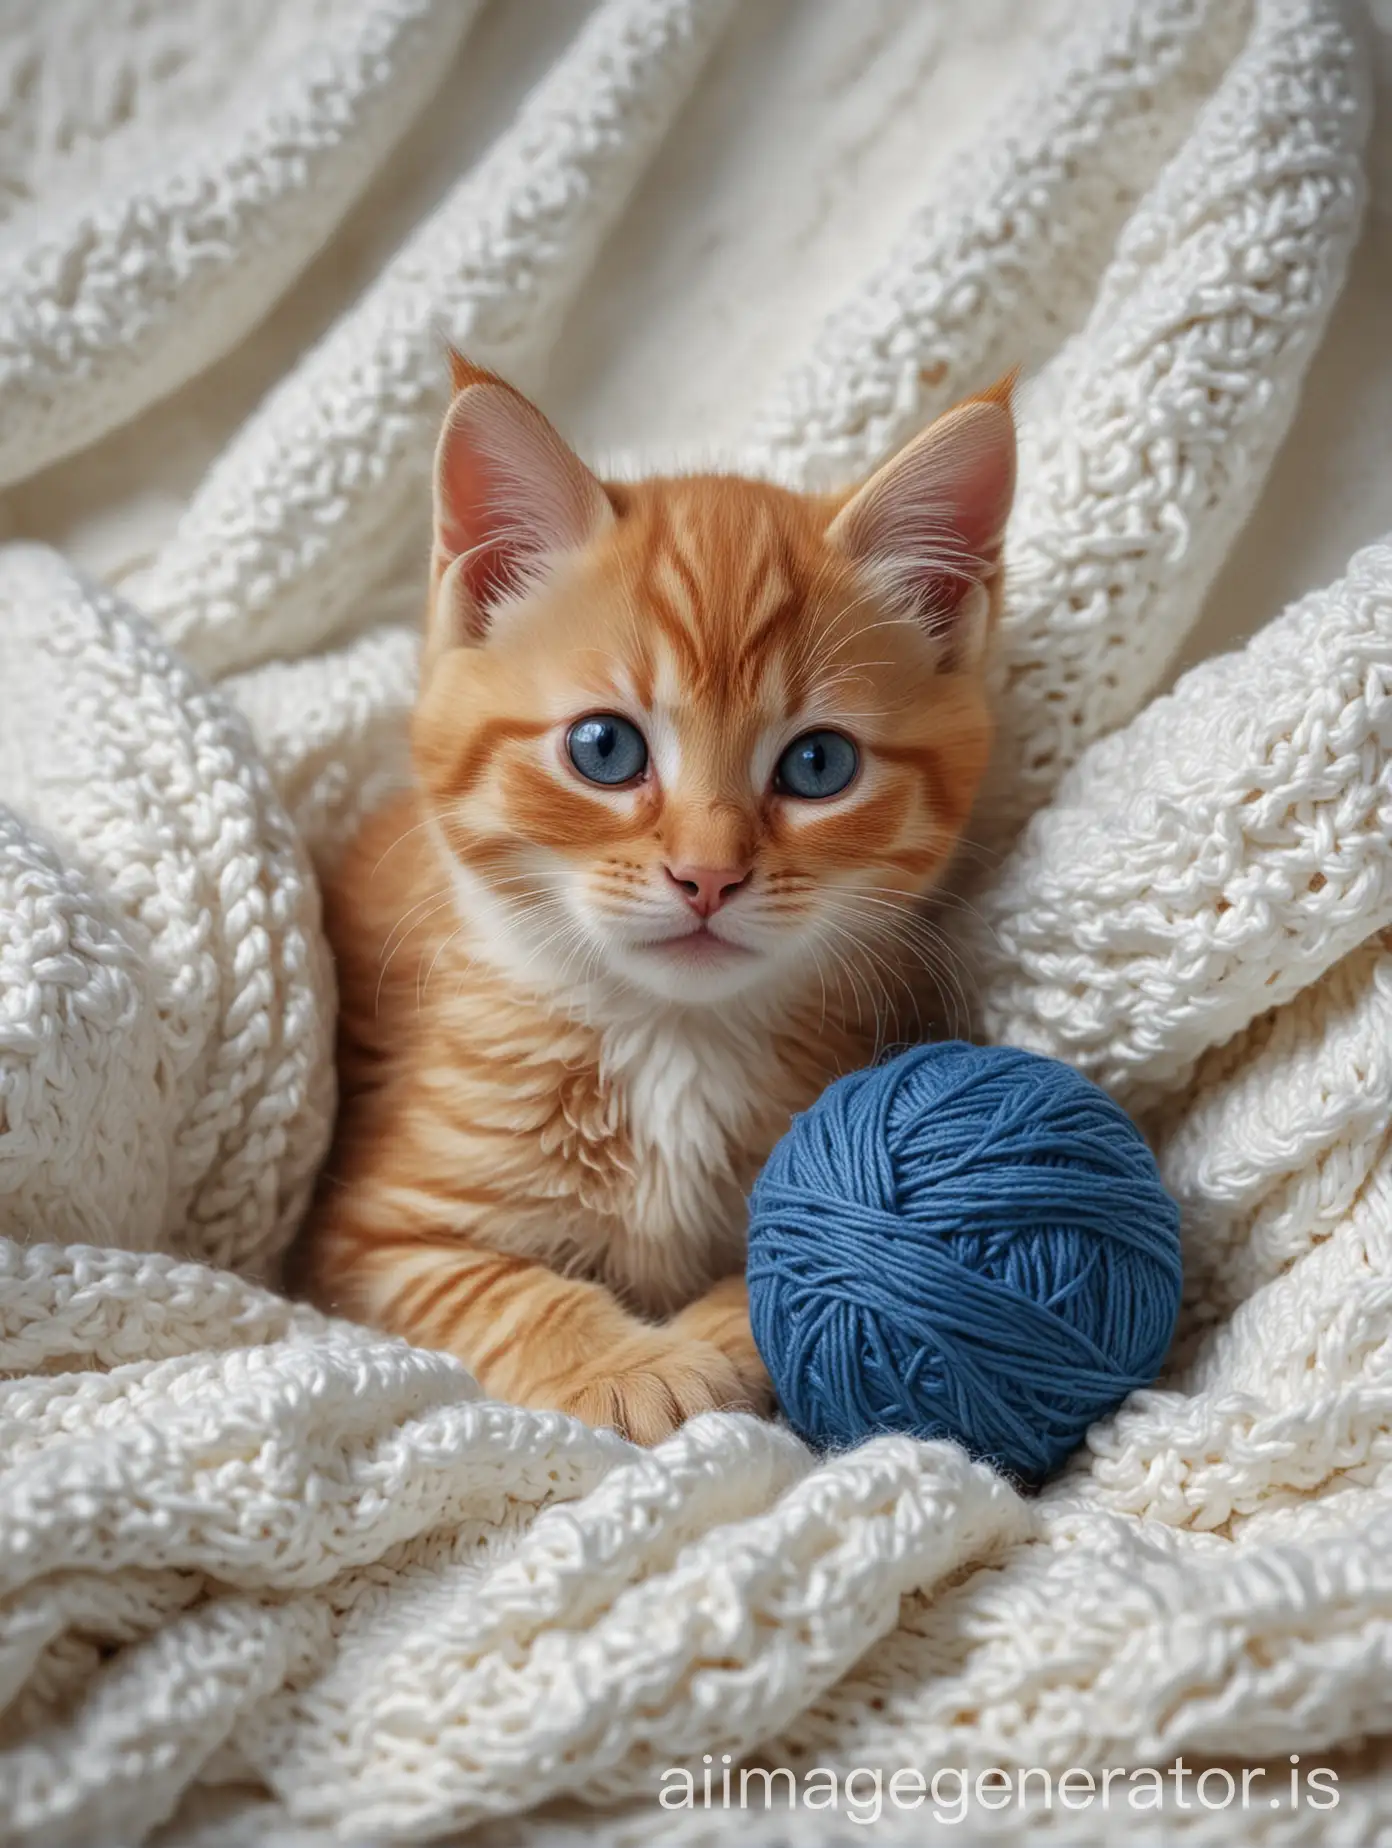 A close-up portrait of a cute ginger kitten curled up on a soft, cozy white knit blanket, with a blue yarn ball next to it, creating a warm and comforting scene.photo ultra realistic, 8K.